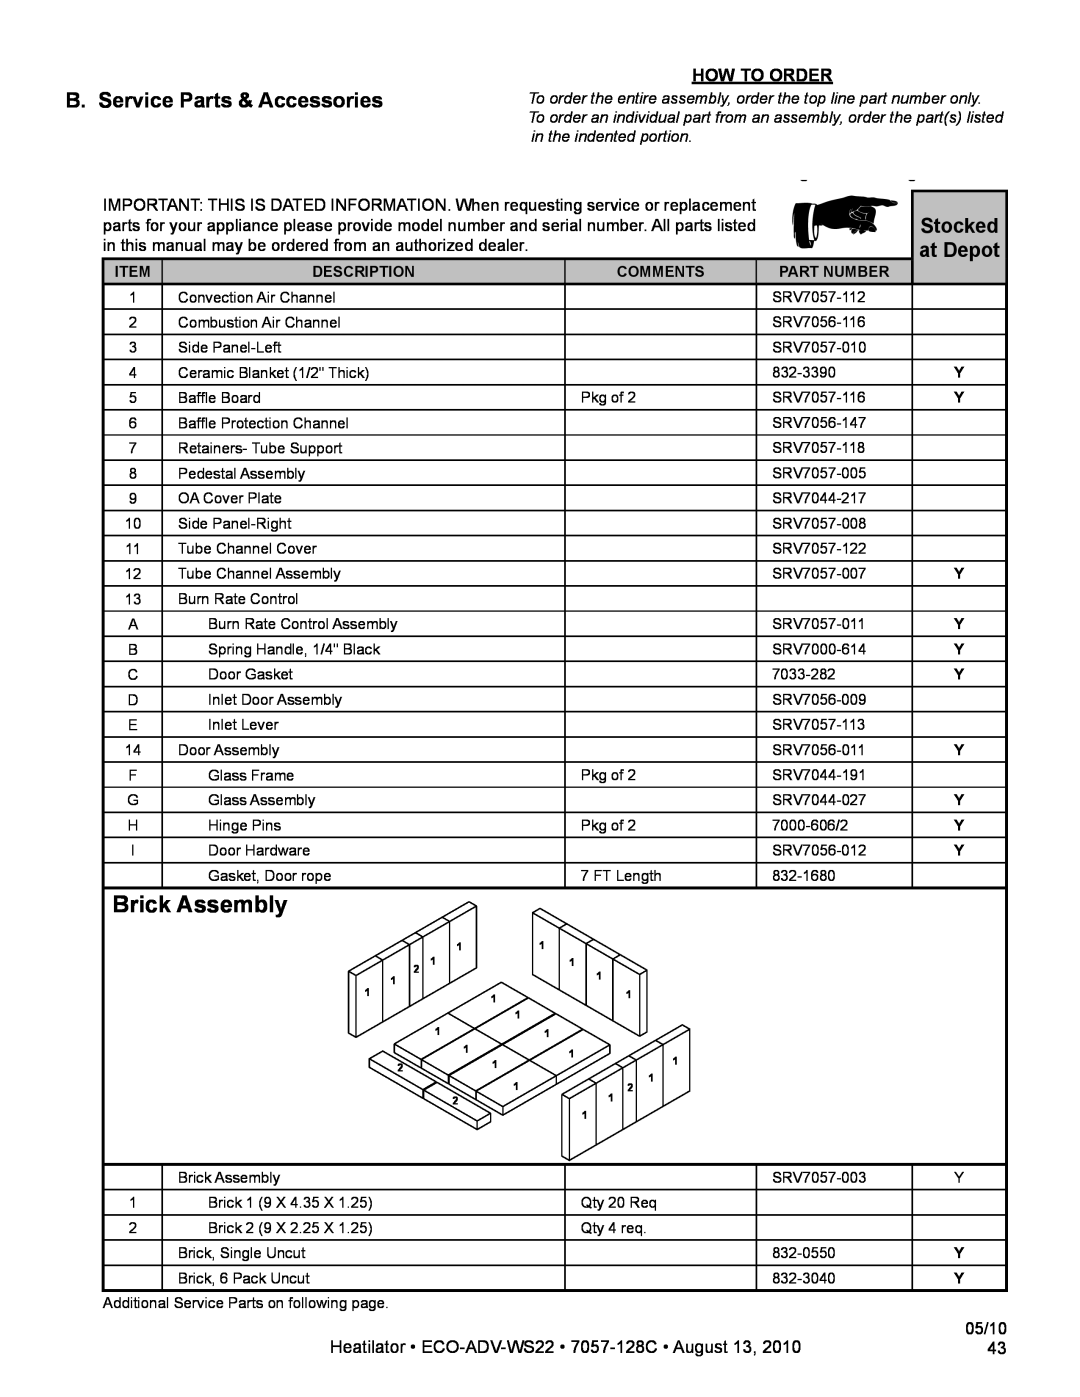 Heatiator ECO-ADV-WS22 Brick Assembly, B. Service Parts & Accessories, How To Order, Description, Comments, Part Number 